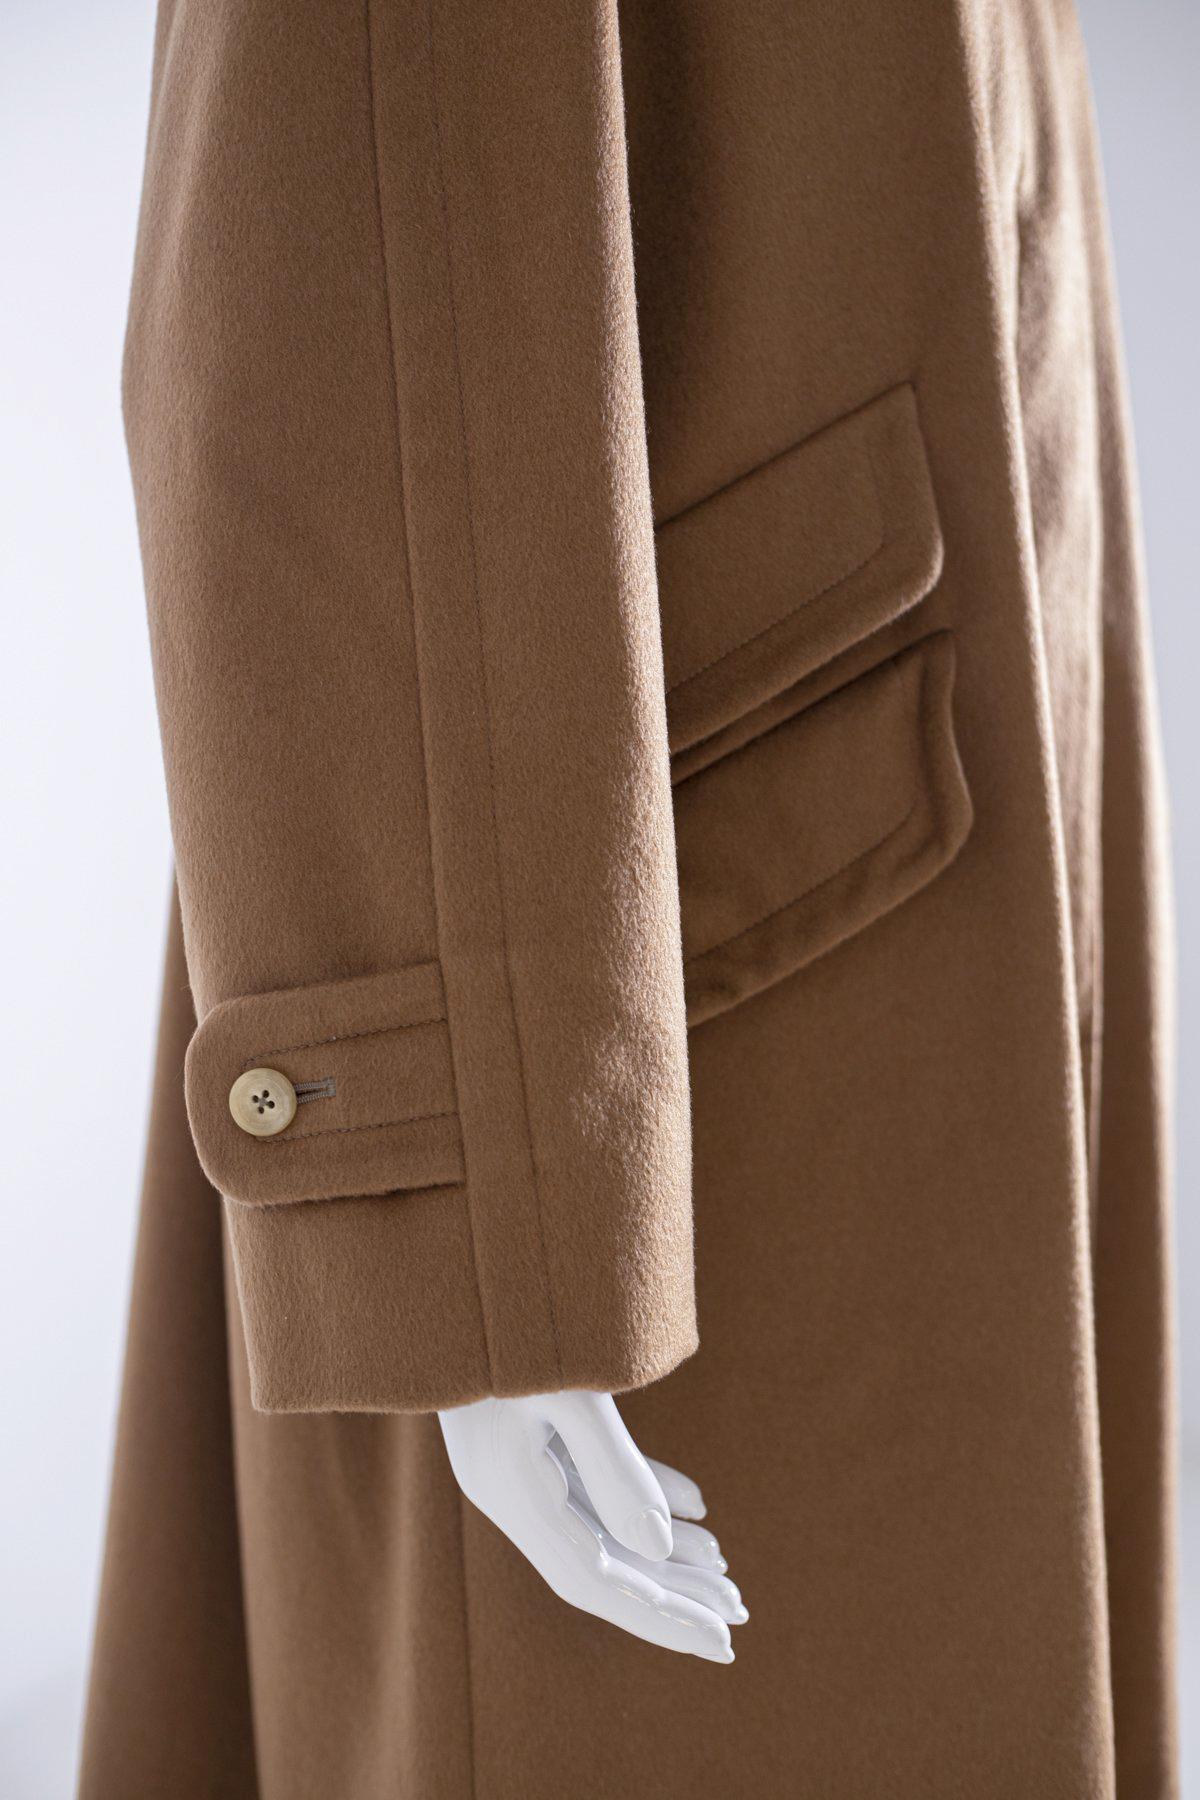 Stunning camel-colored women's coat from Aquascutum, the coat is 100% pure cashmere. The line is classic, the length reaches just below the knees, on the front three comfortable pockets. The jacket is perfect, never worn. Inside we find the original